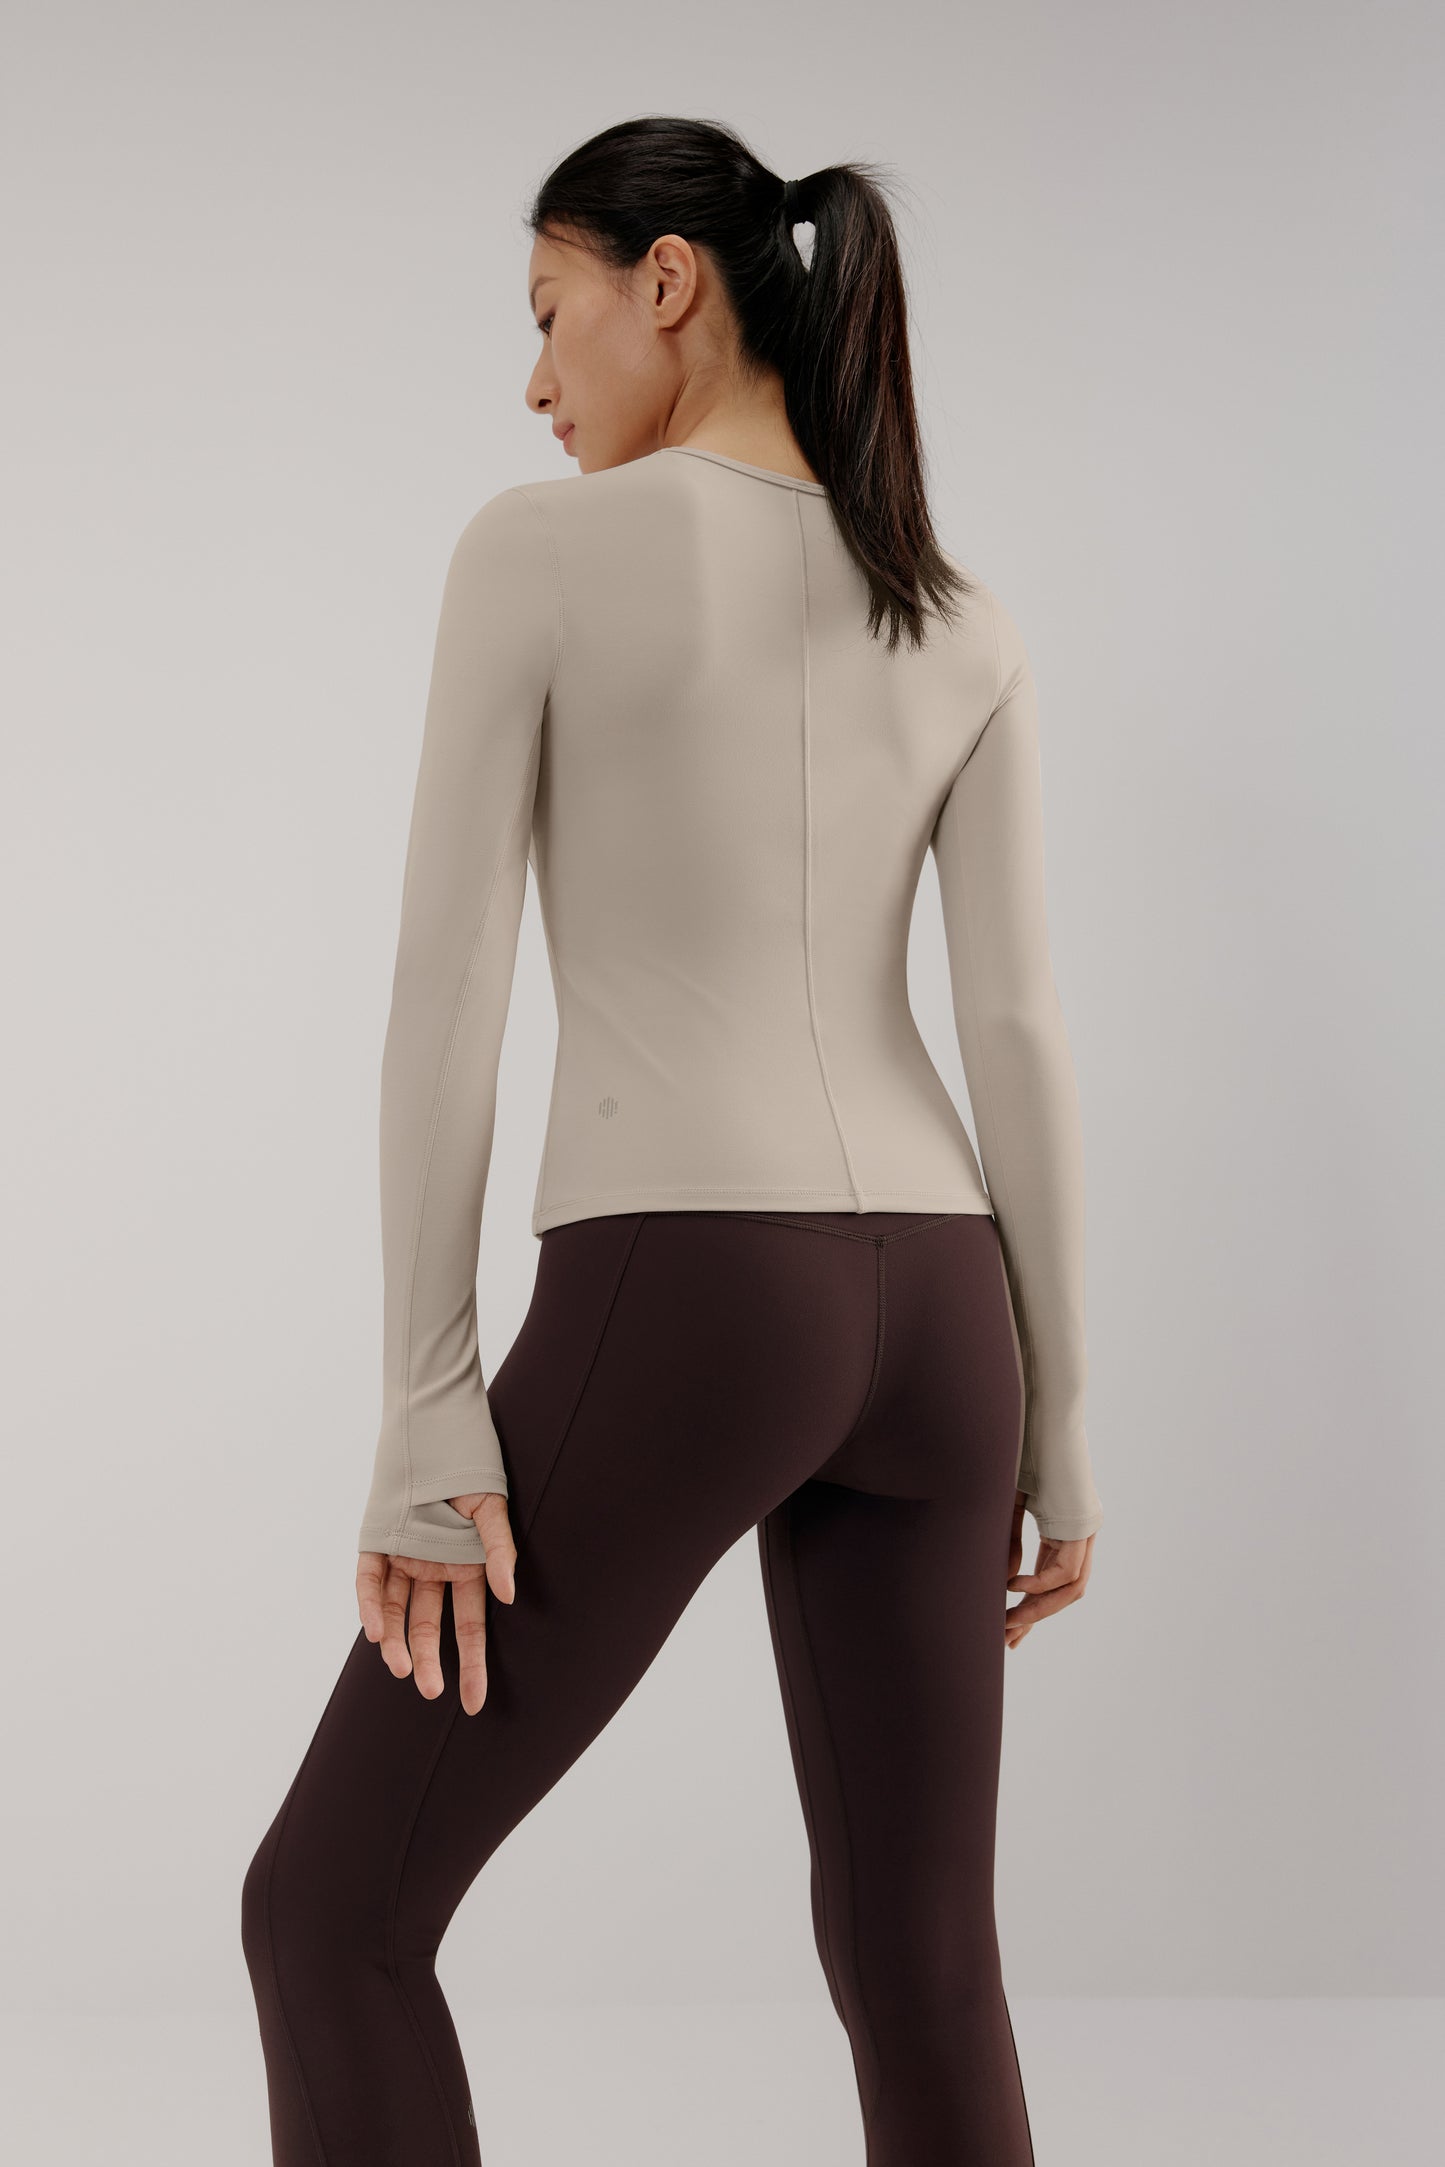 A woman wears a grey mousse long sleeve sports top and brown leggings from back